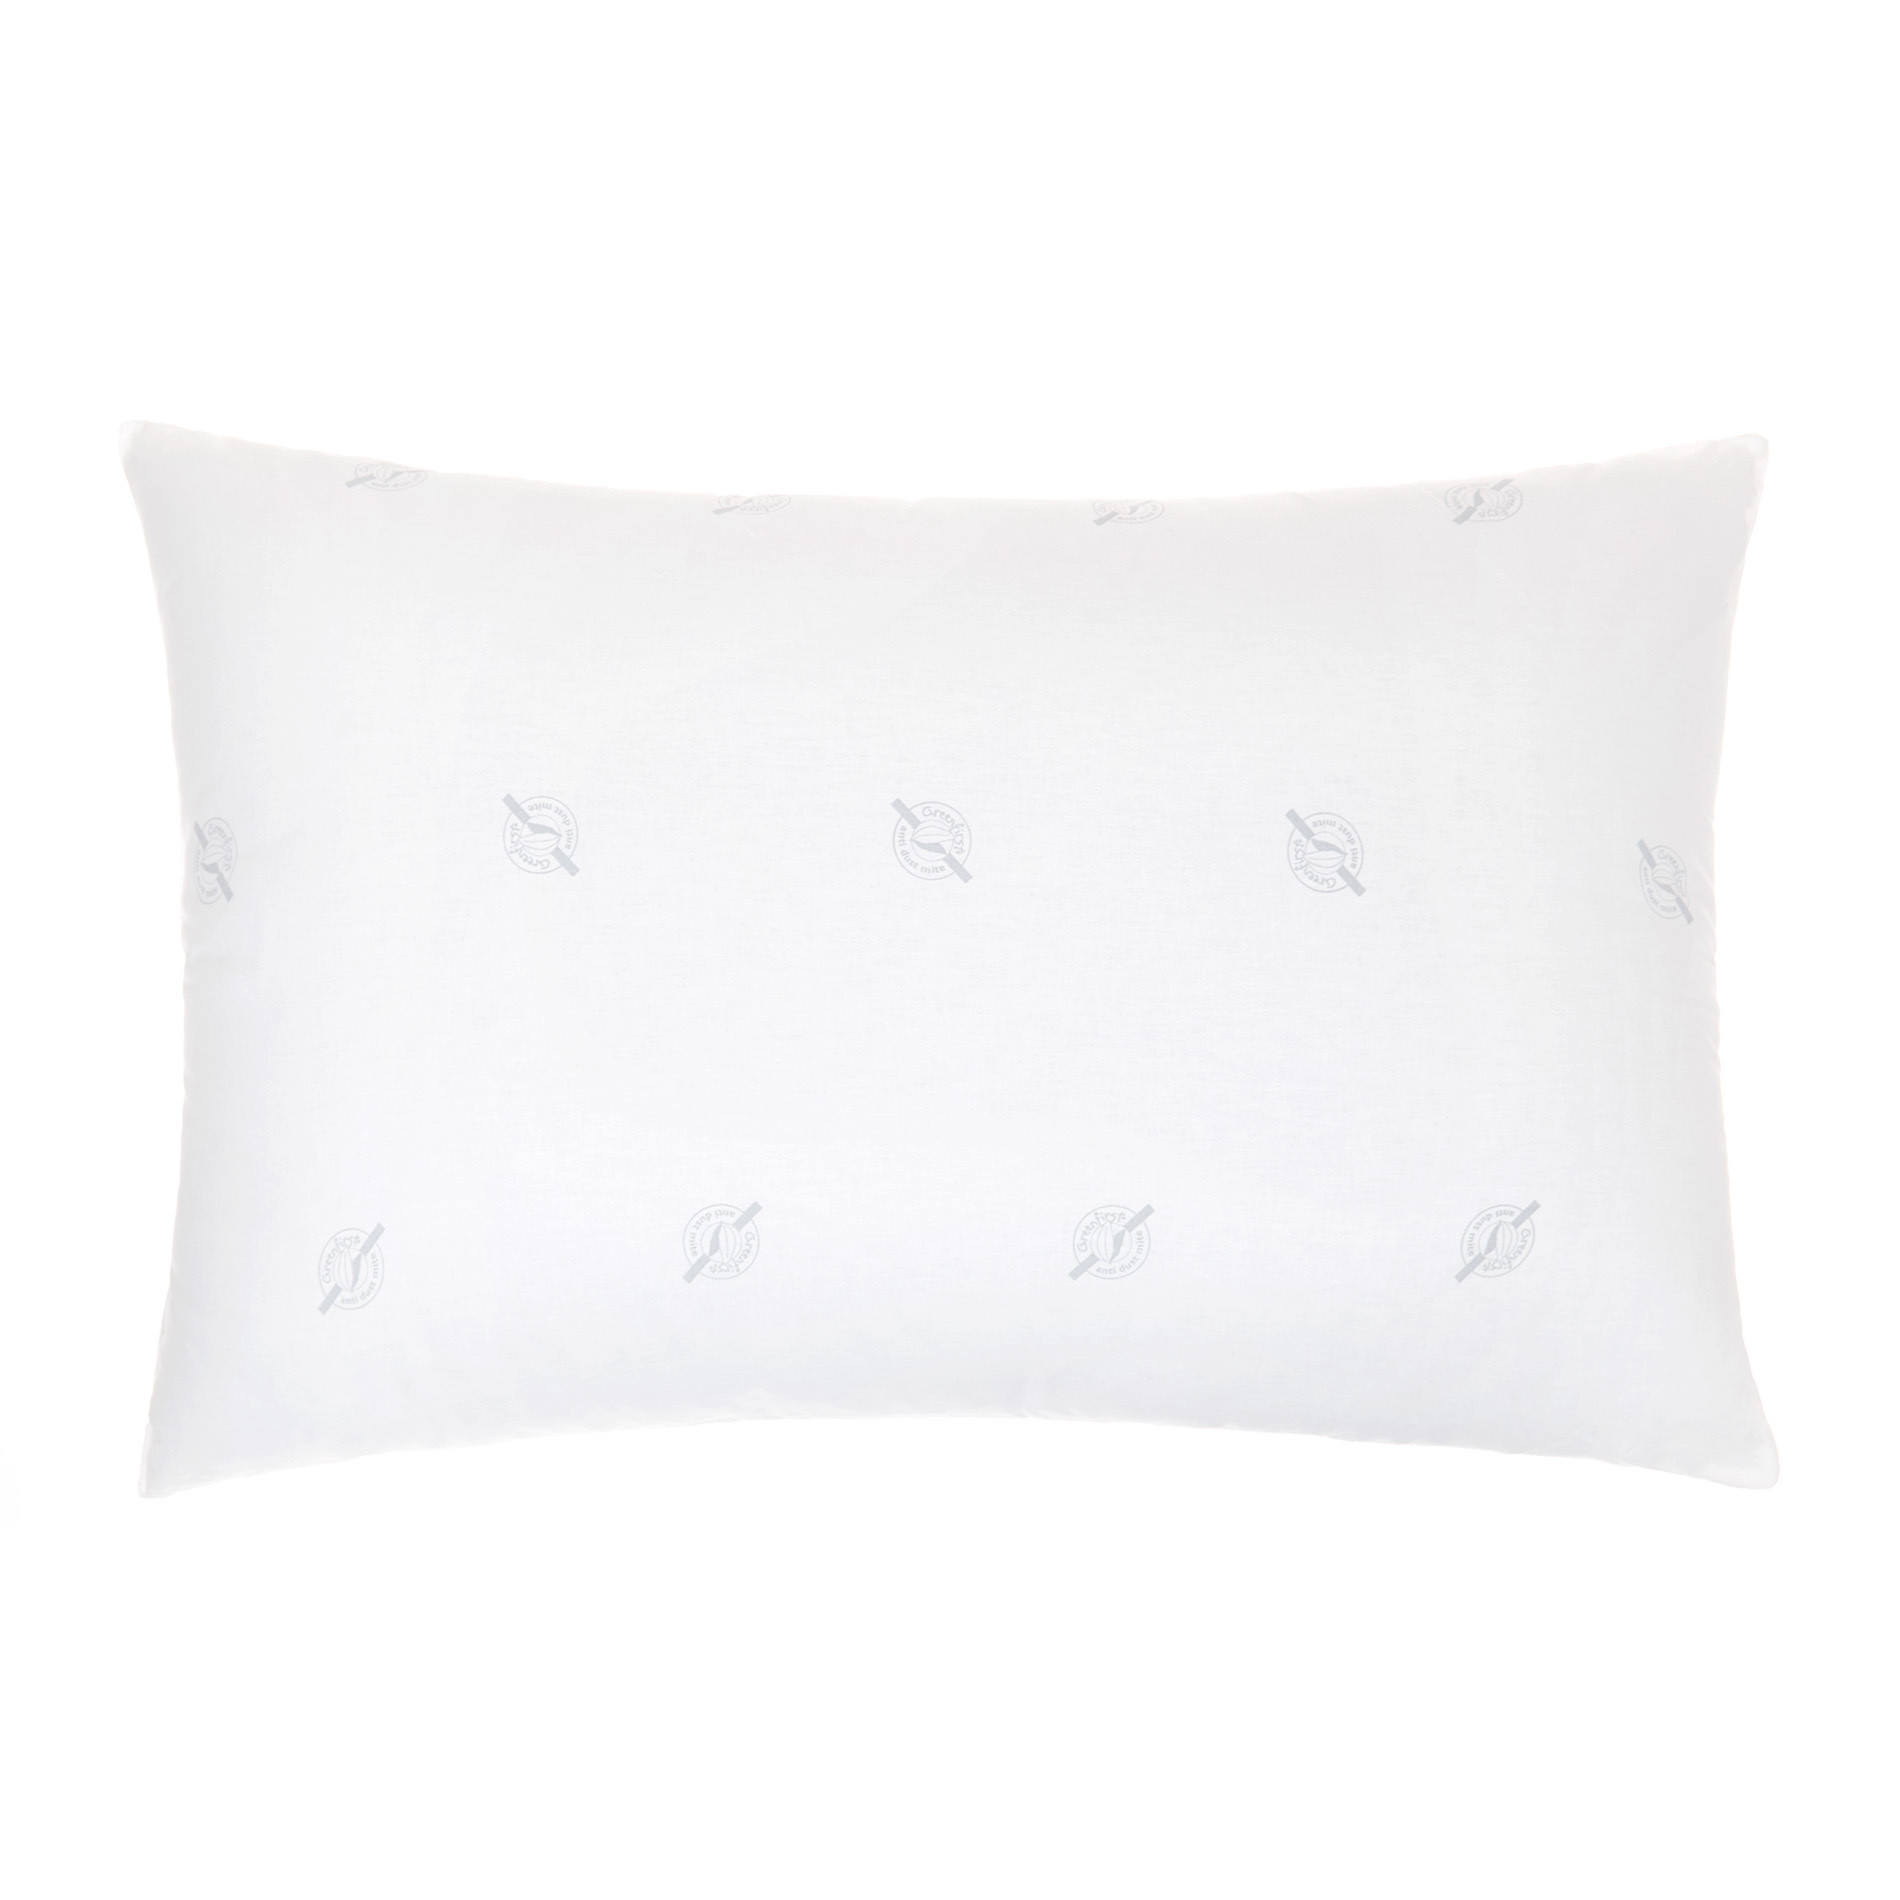 Cotton pillow with anti-mite treatment, White, large image number 0